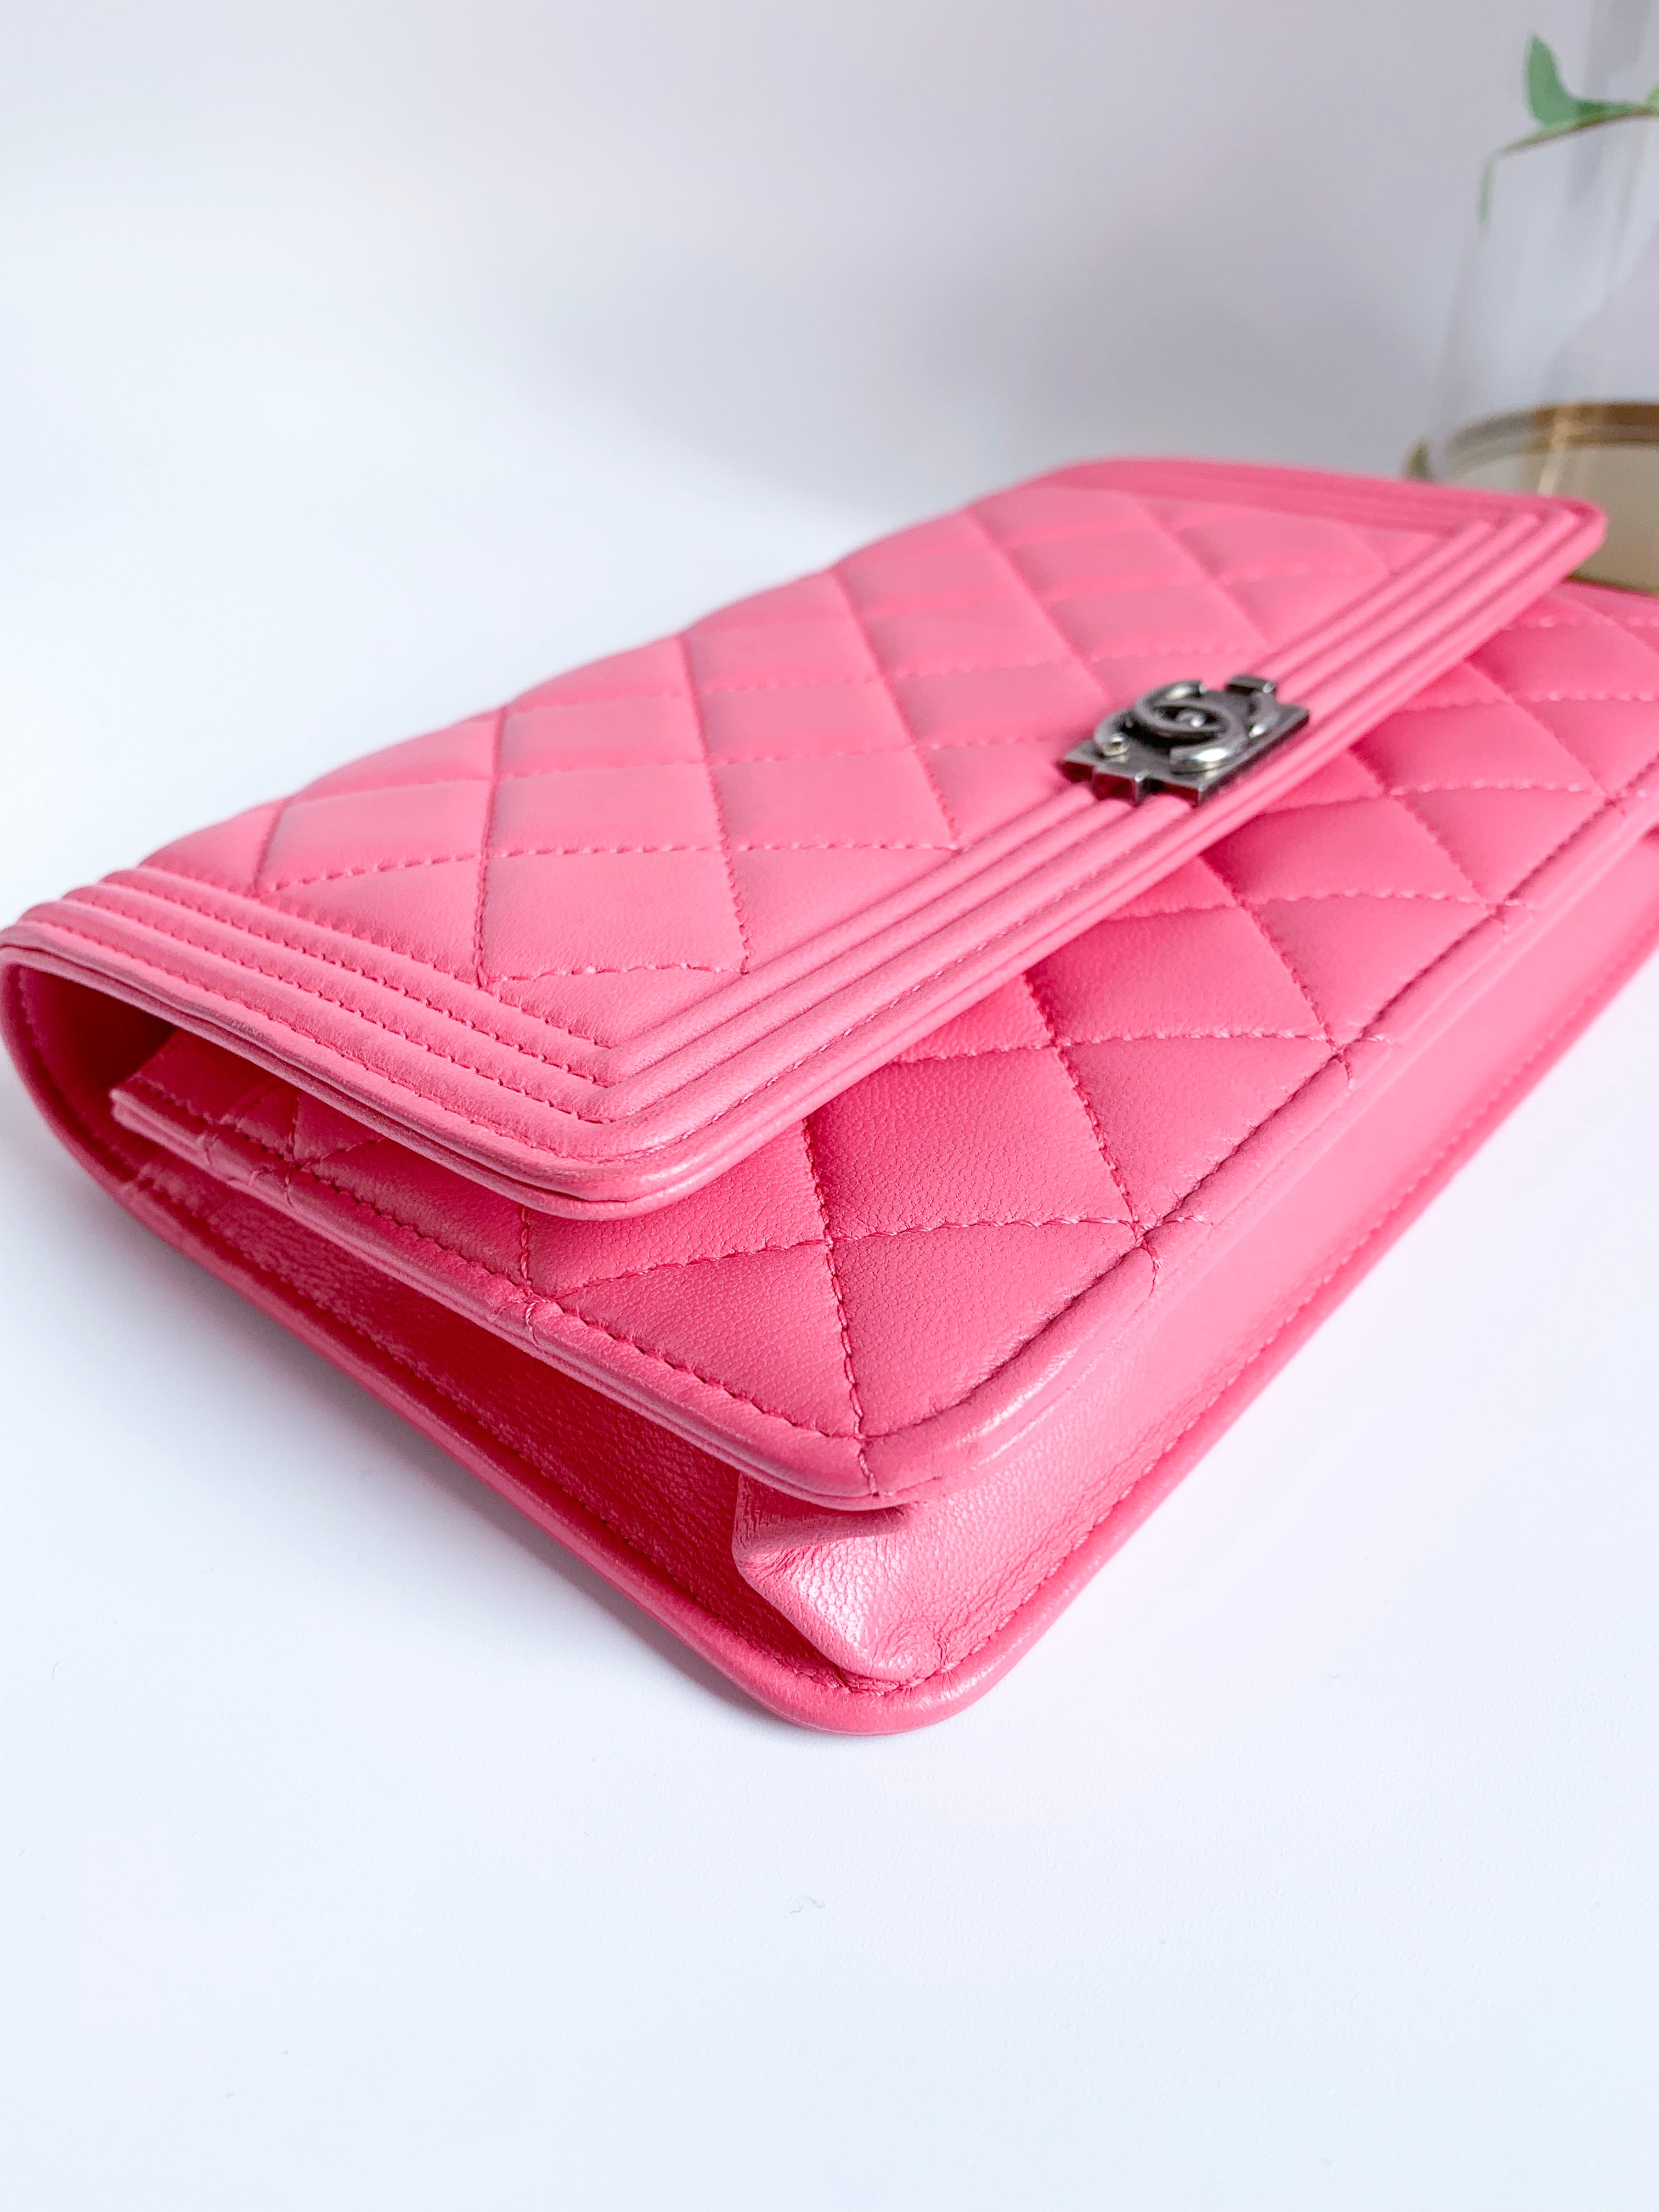 Chanel Small Boy Caviar Leather Zip Around Wallet Pink